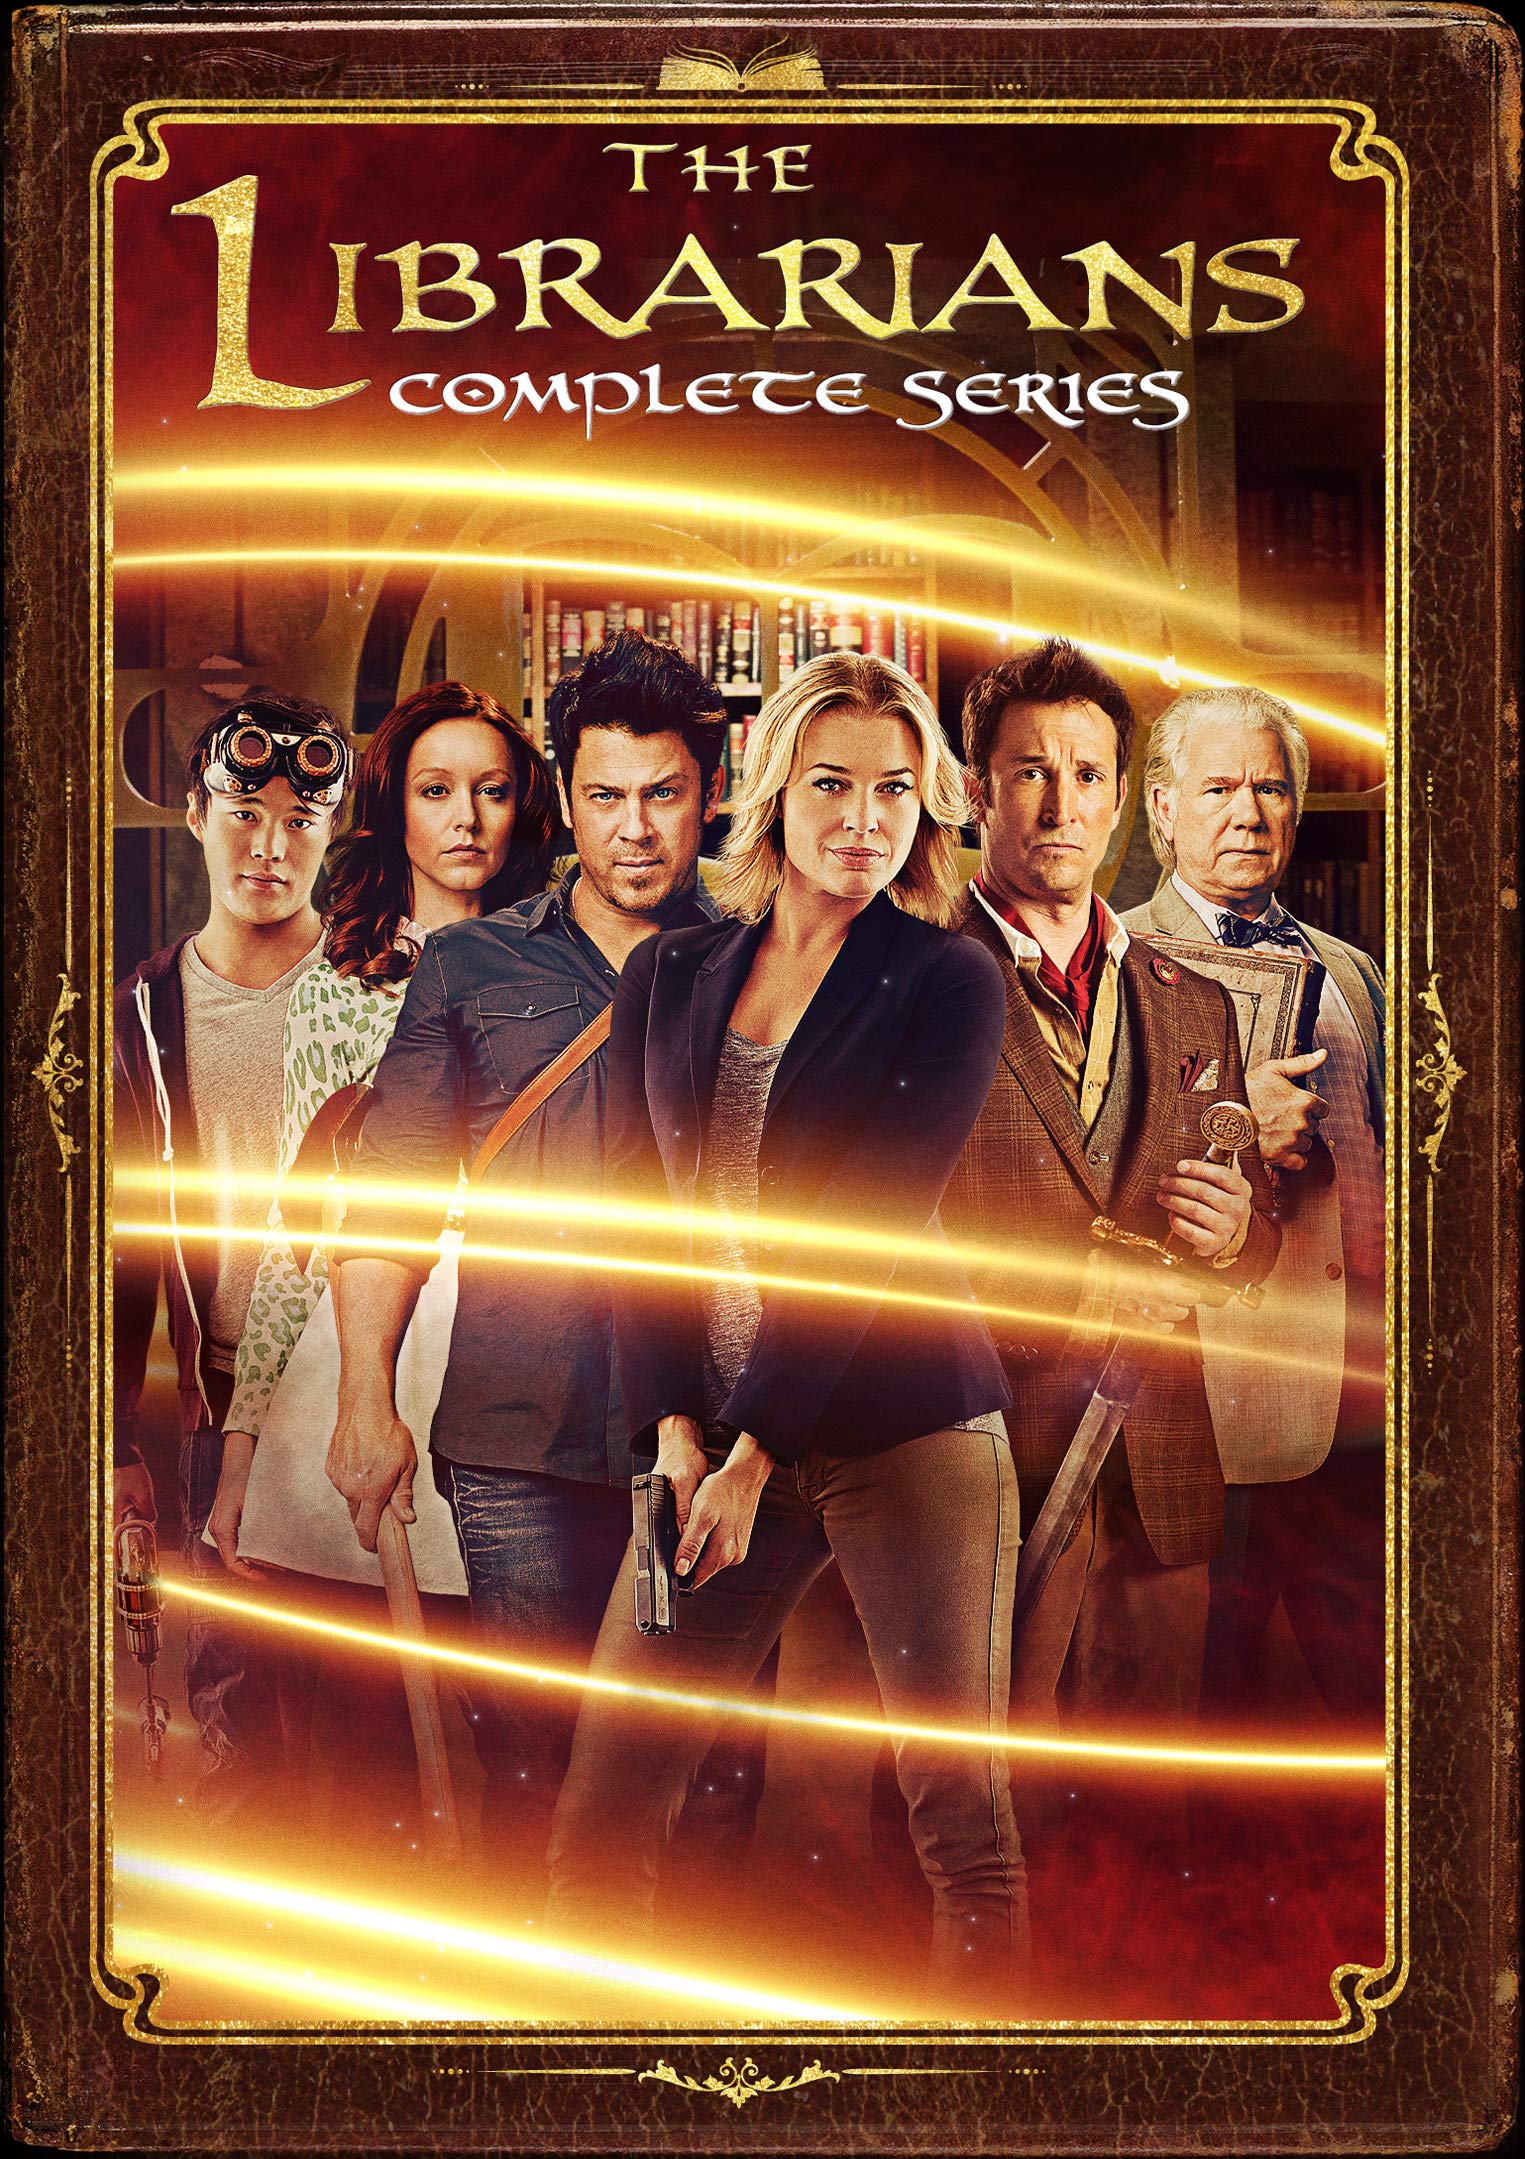 The Librarians: The Complete Series on MovieShack